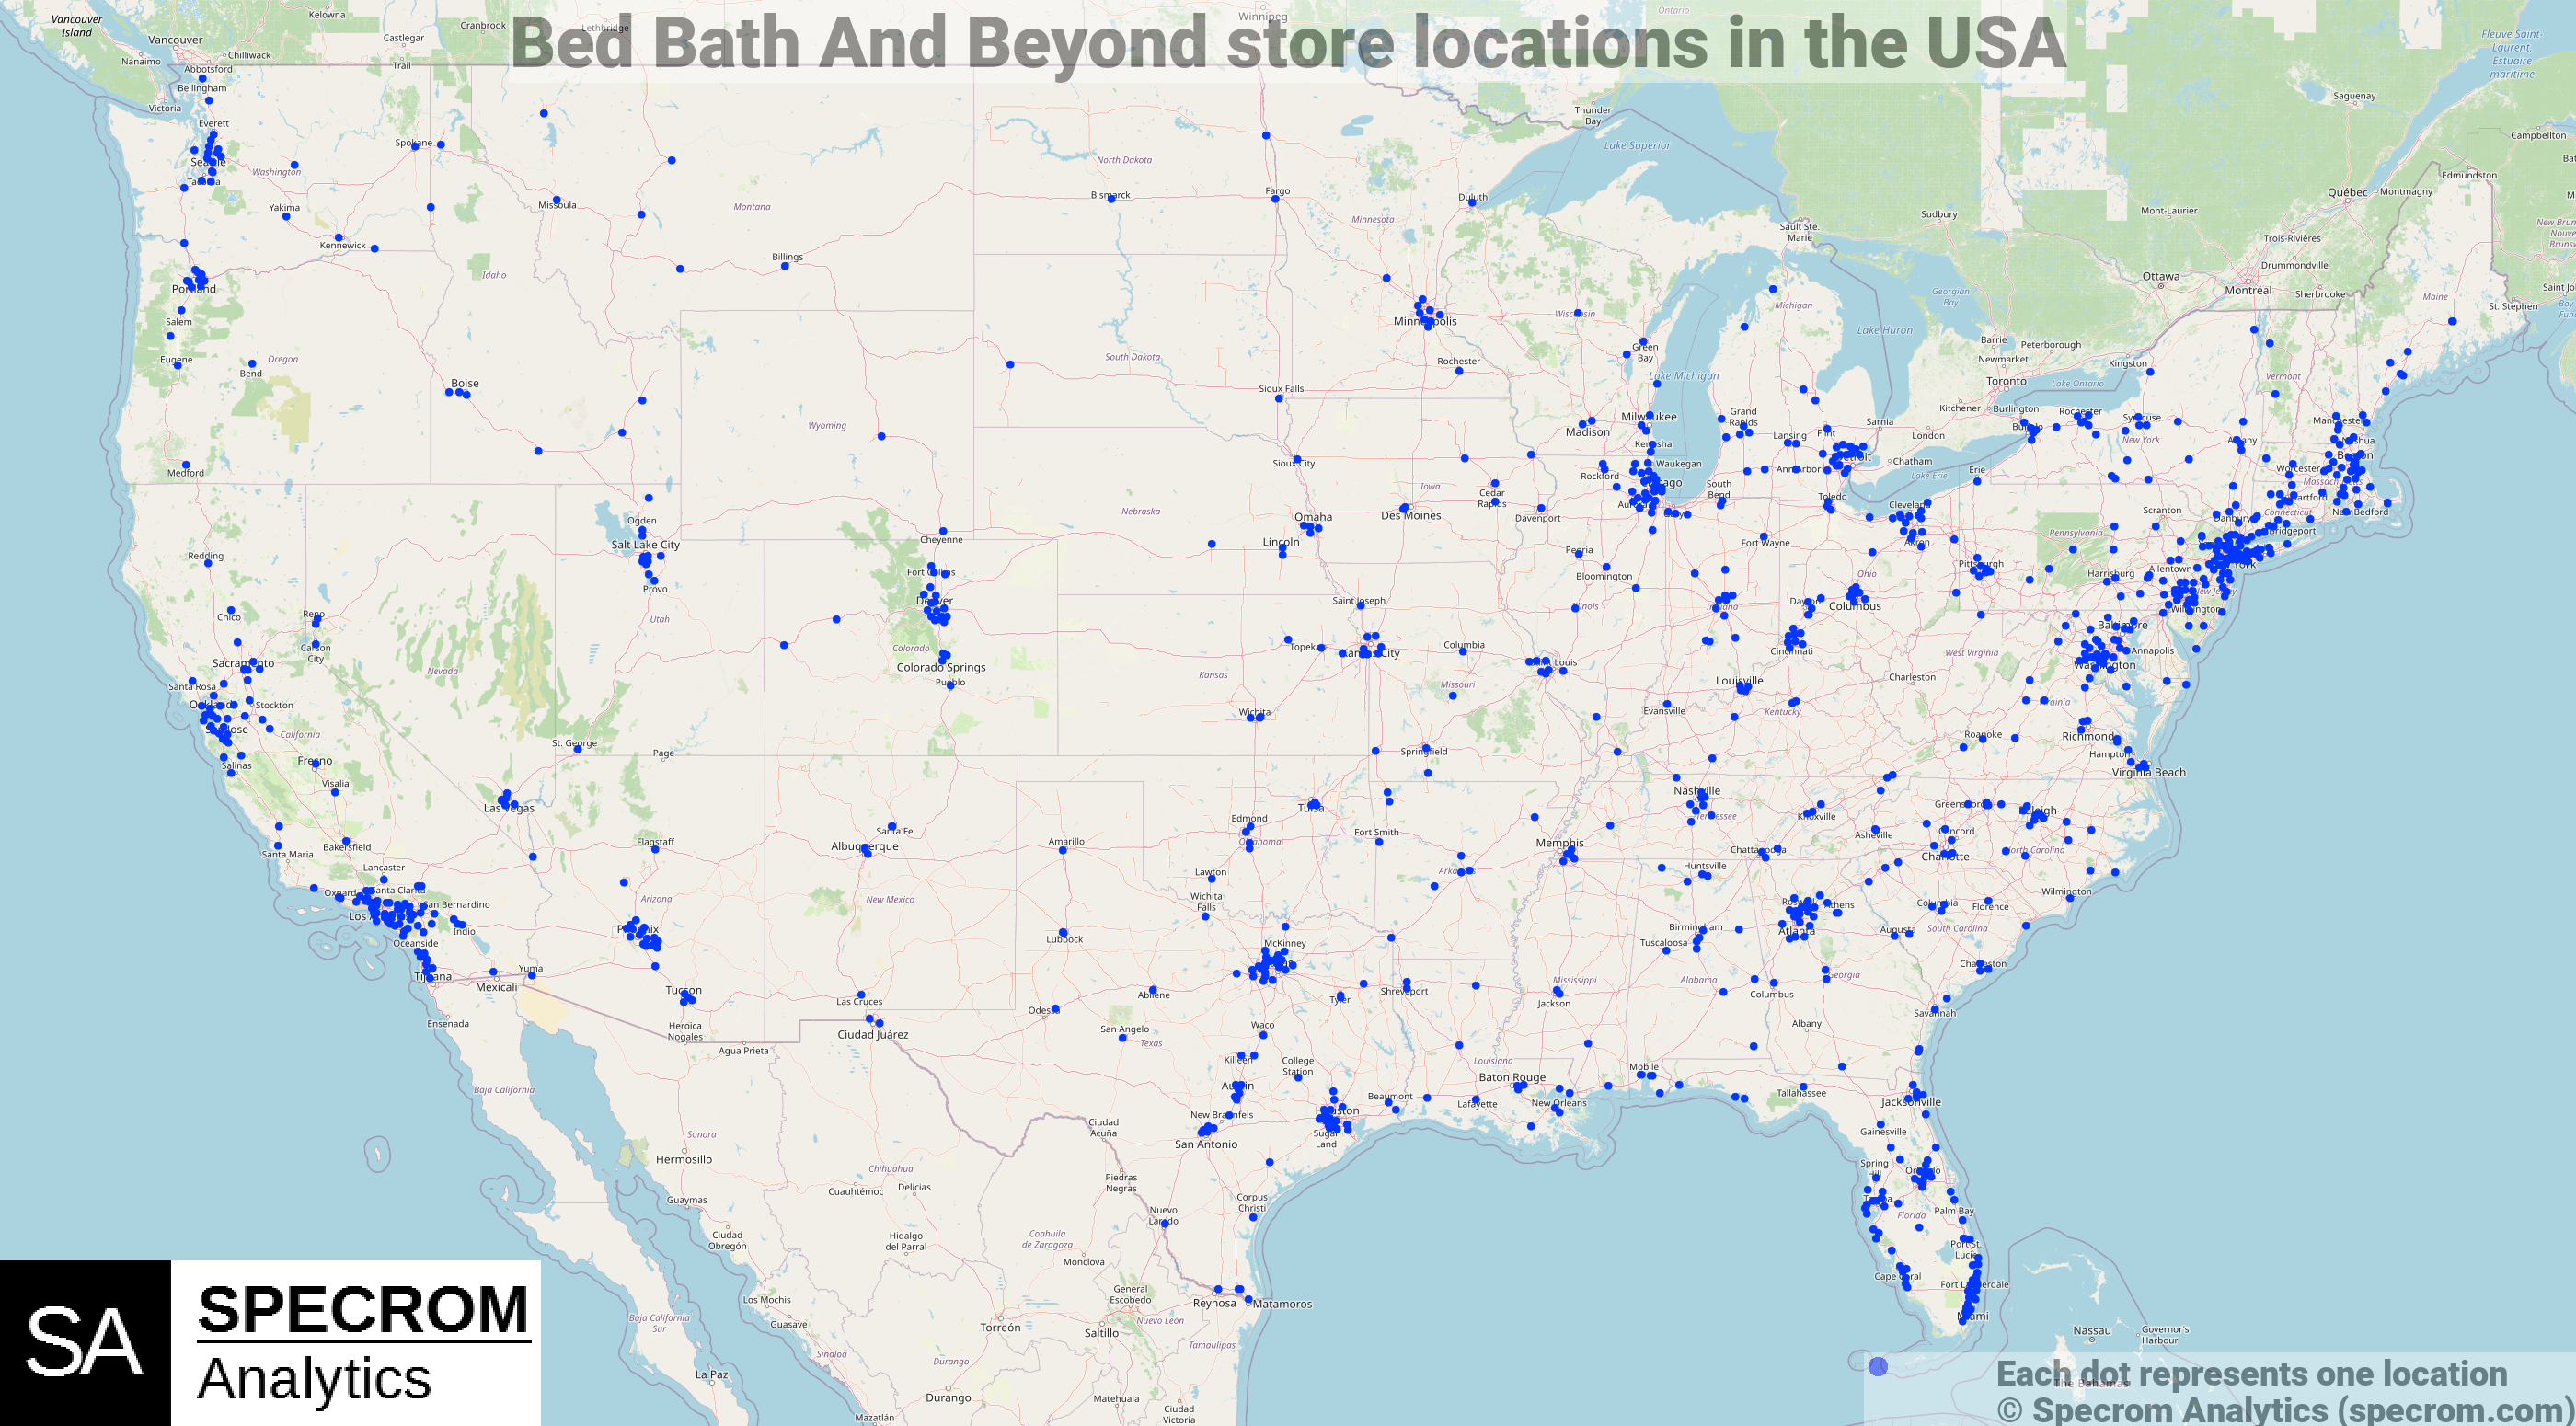 Bed Bath And Beyond store locations in the USA